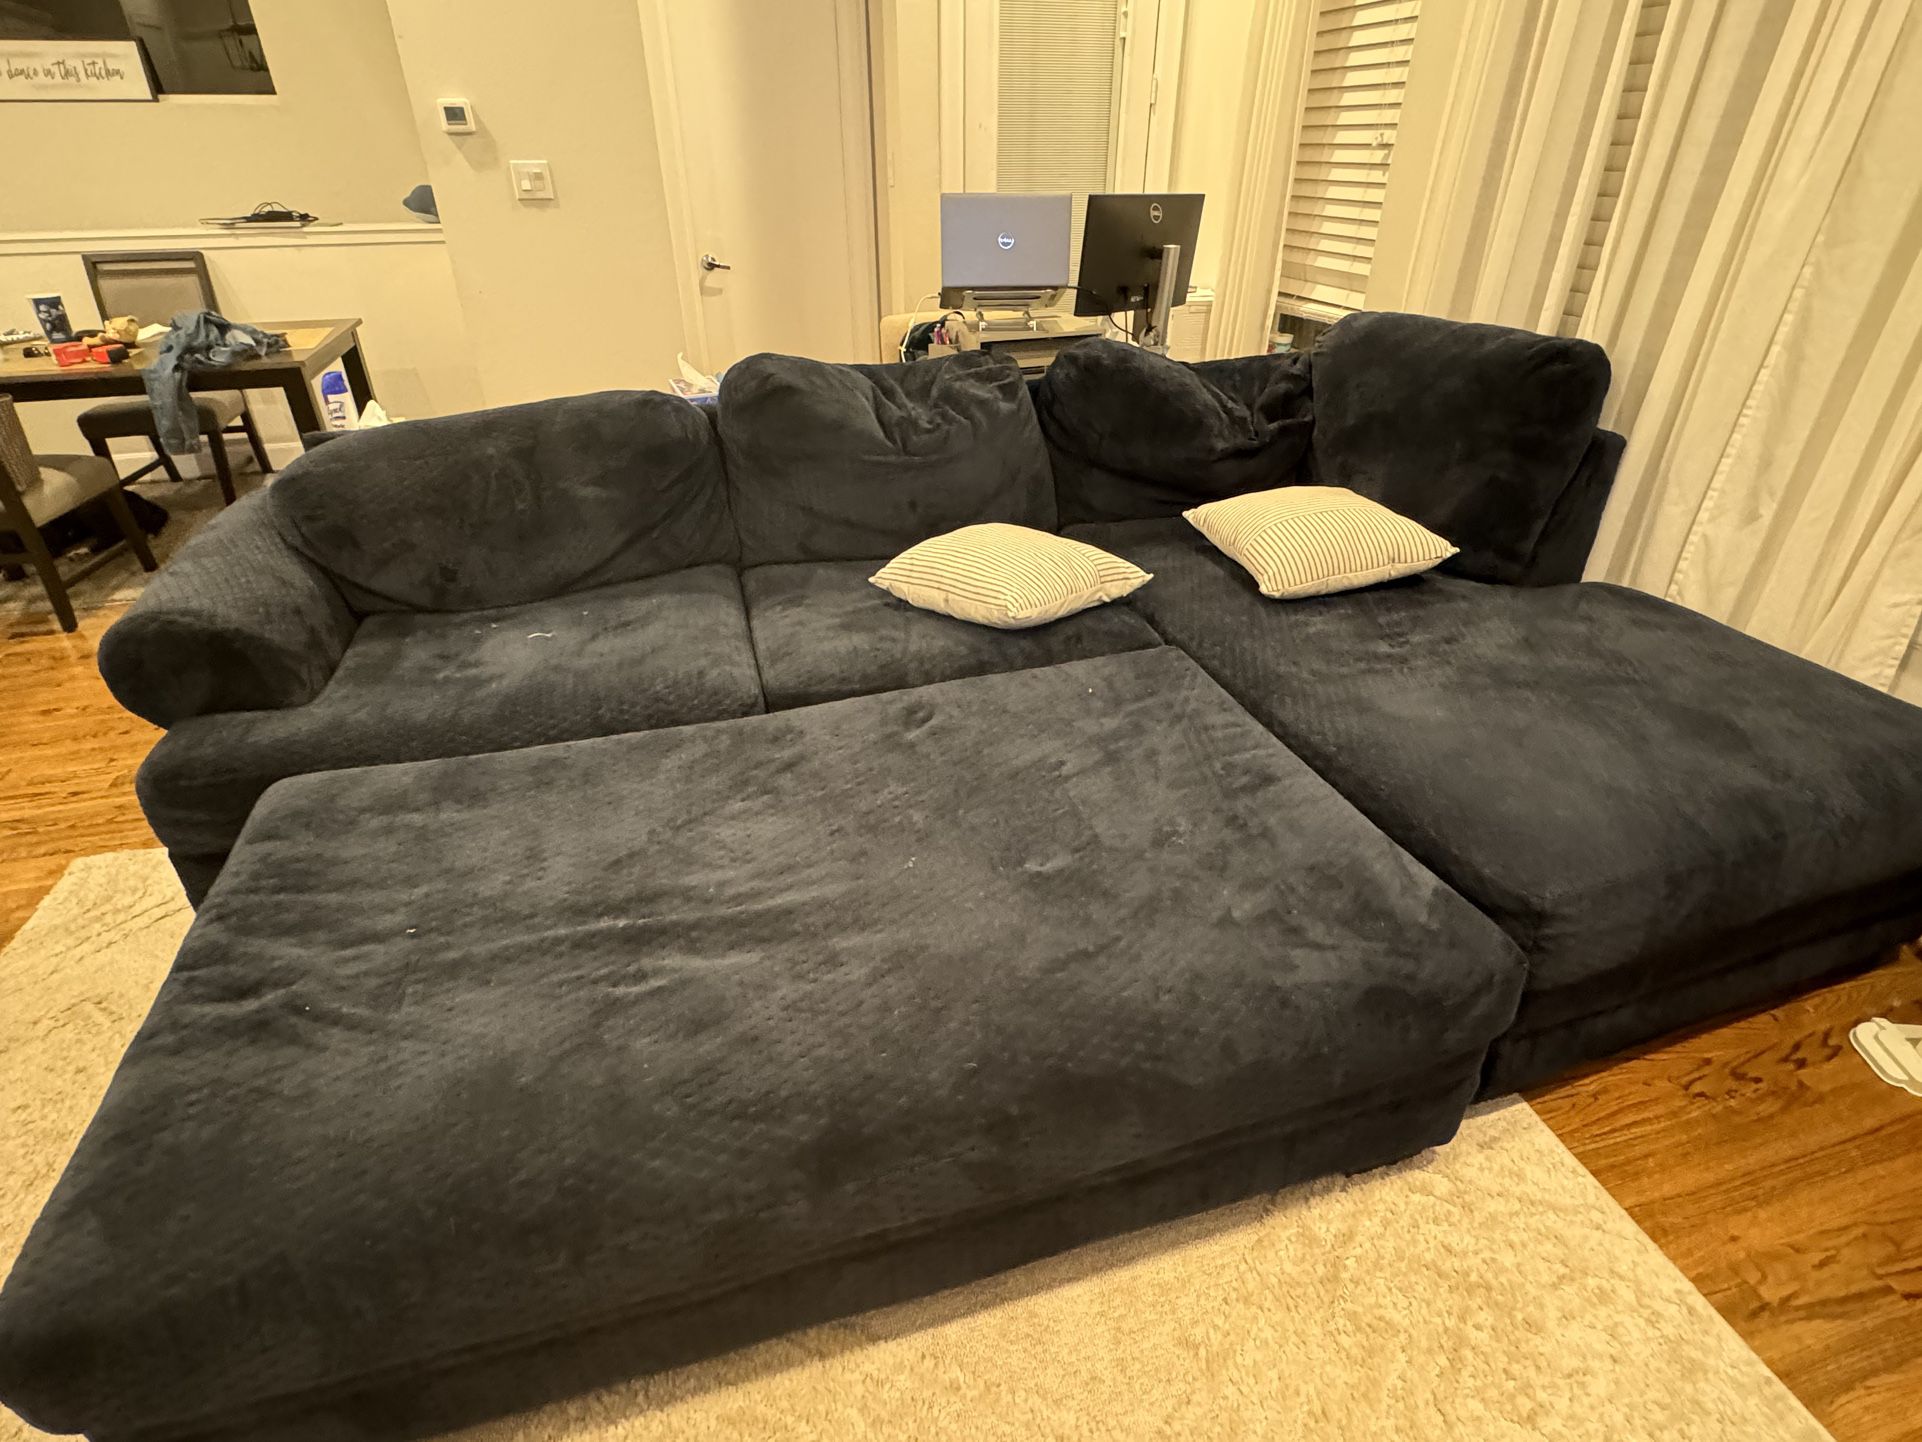 Pending Pickup-FREE Couch Please Read Full Description 